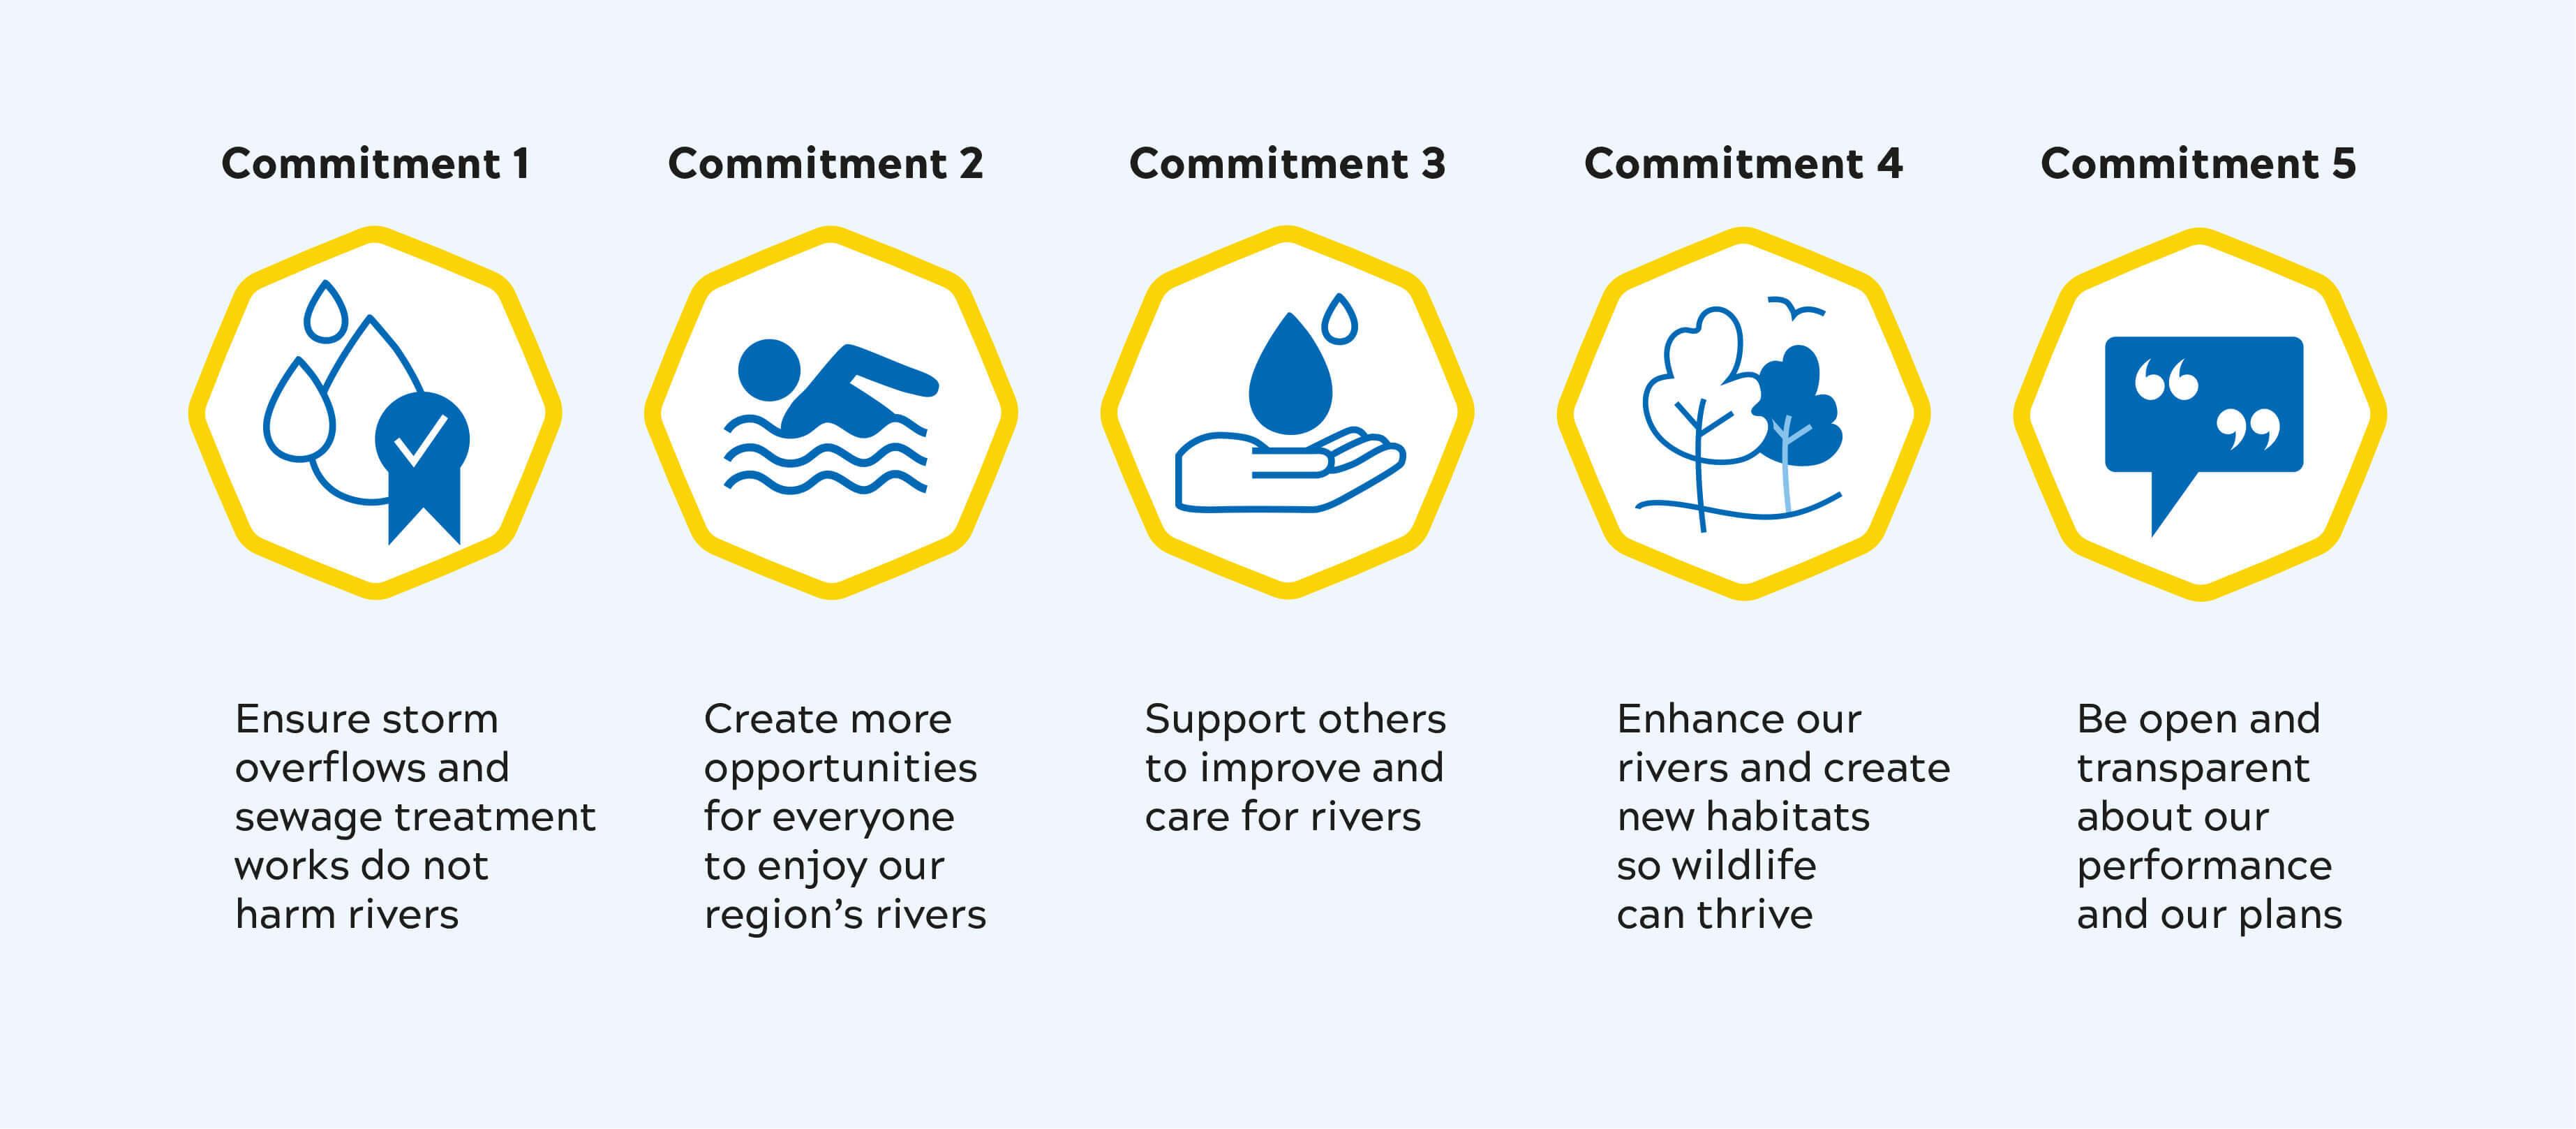 The five commitments of the Get River Positive plan.